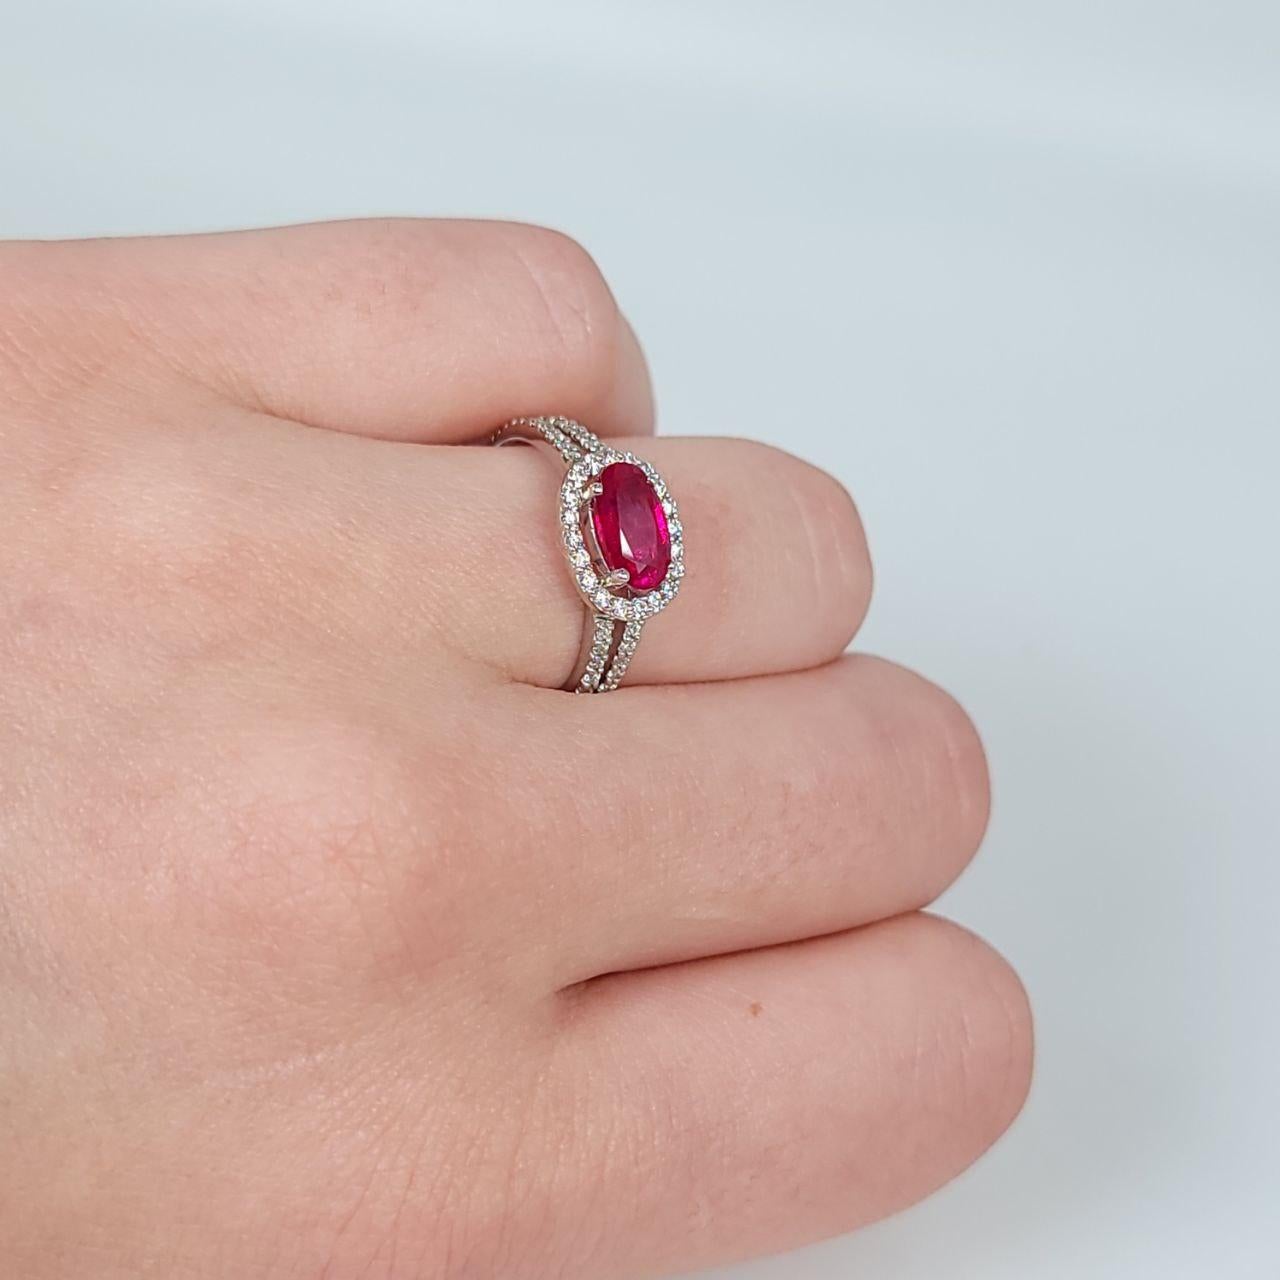 Stunning ruby & diamond cocktail ring made with 100% natural ruby and diamonds.

GRAM WEIGHT: 3.34gr
METAL: 18KT white gold

NATURAL DIAMOND(S)
Cut: Round Brilliant
Color: G 
Clarity: SI (average)
Carat: 0.45ct

NATURAL RUBY (NATURAL UNTREATED)
Cut: